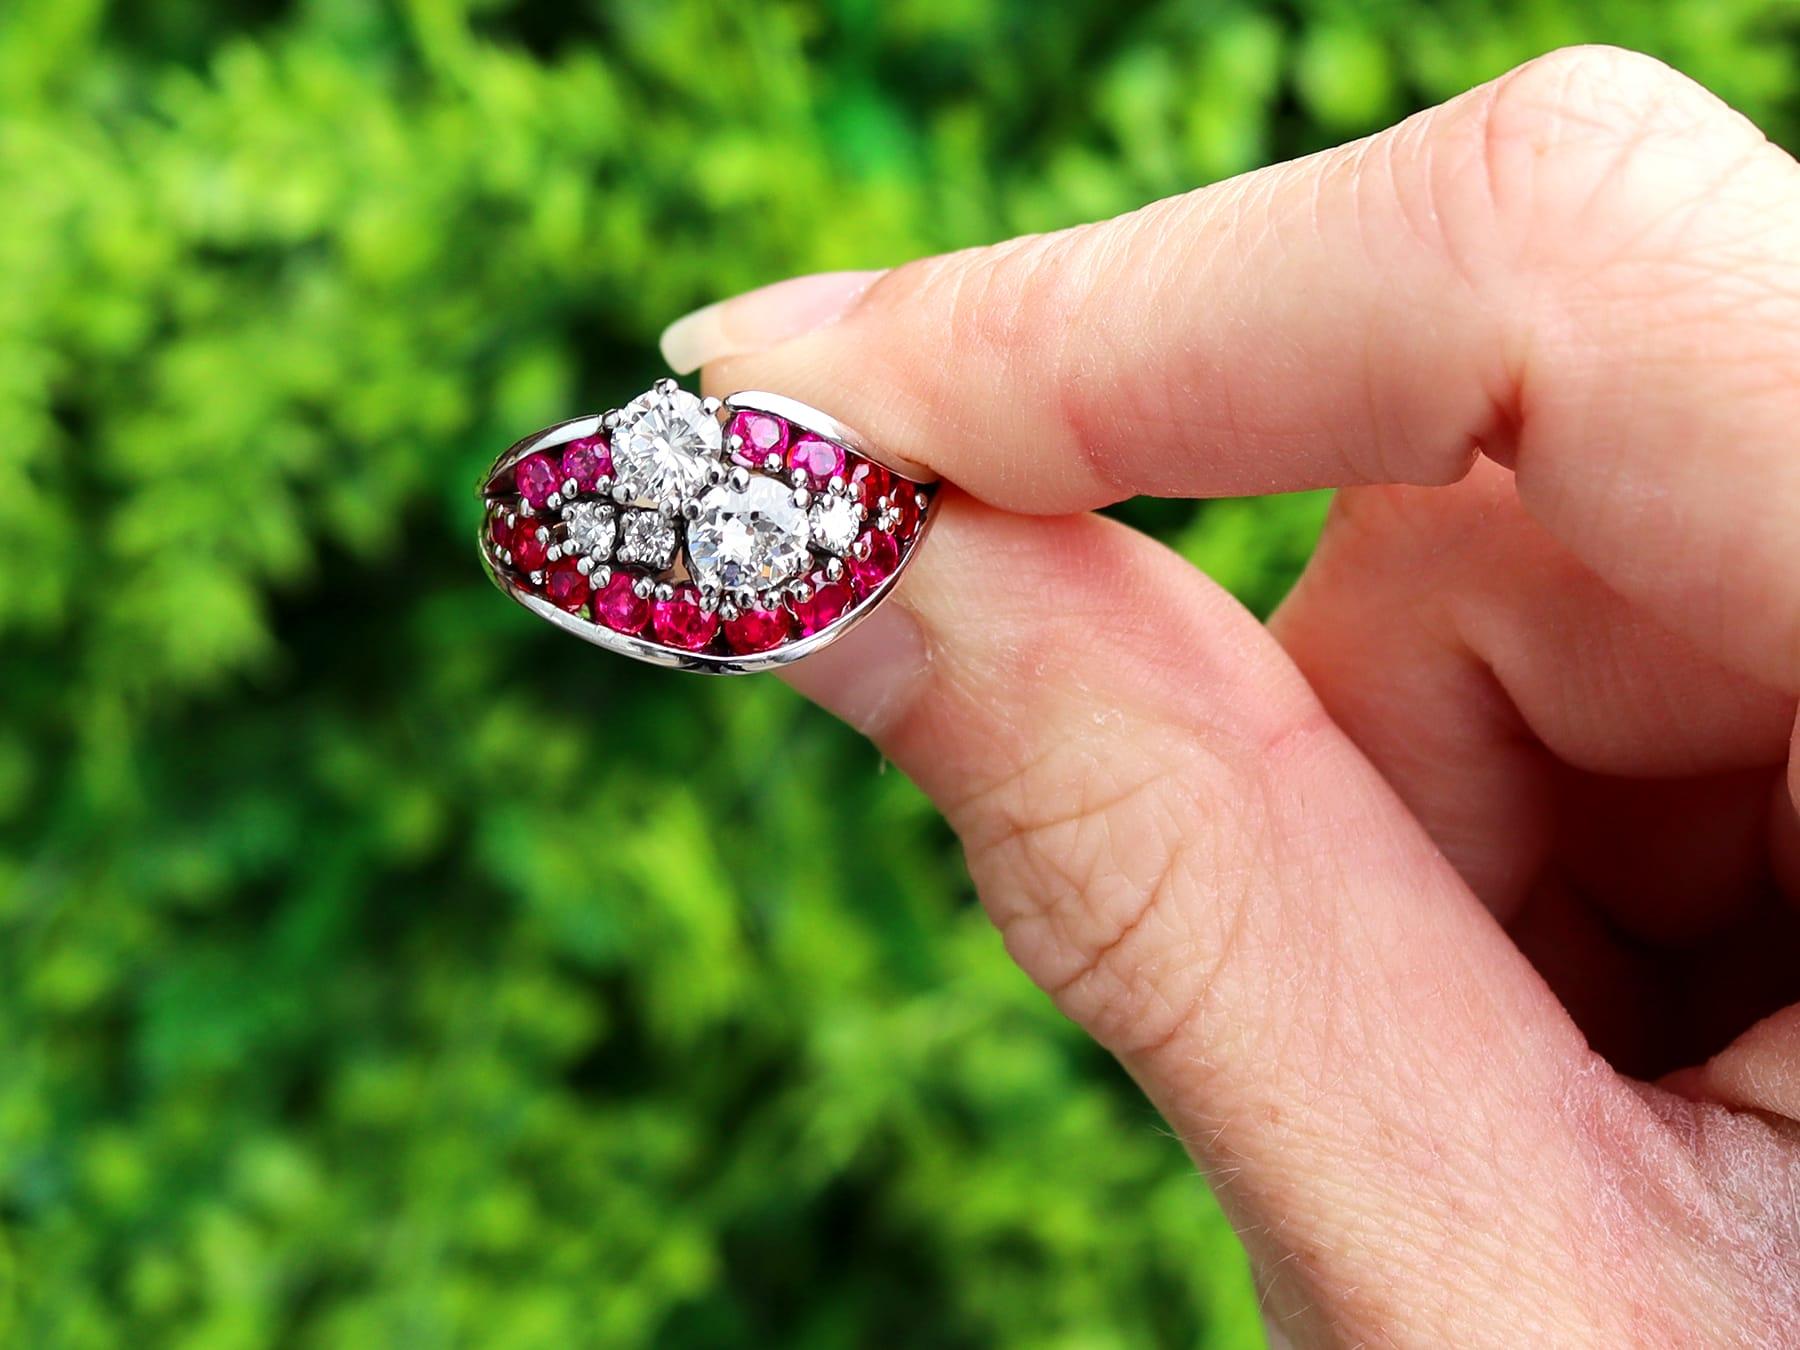 A stunning, fine and impressive 0.82 carat ruby and 1.28 carat diamond, 18 karat white gold dress ring; part of our diverse vintage ruby jewellery collection

This stunning, fine and impressive vintage ruby and ring with diamonds has been crafted in